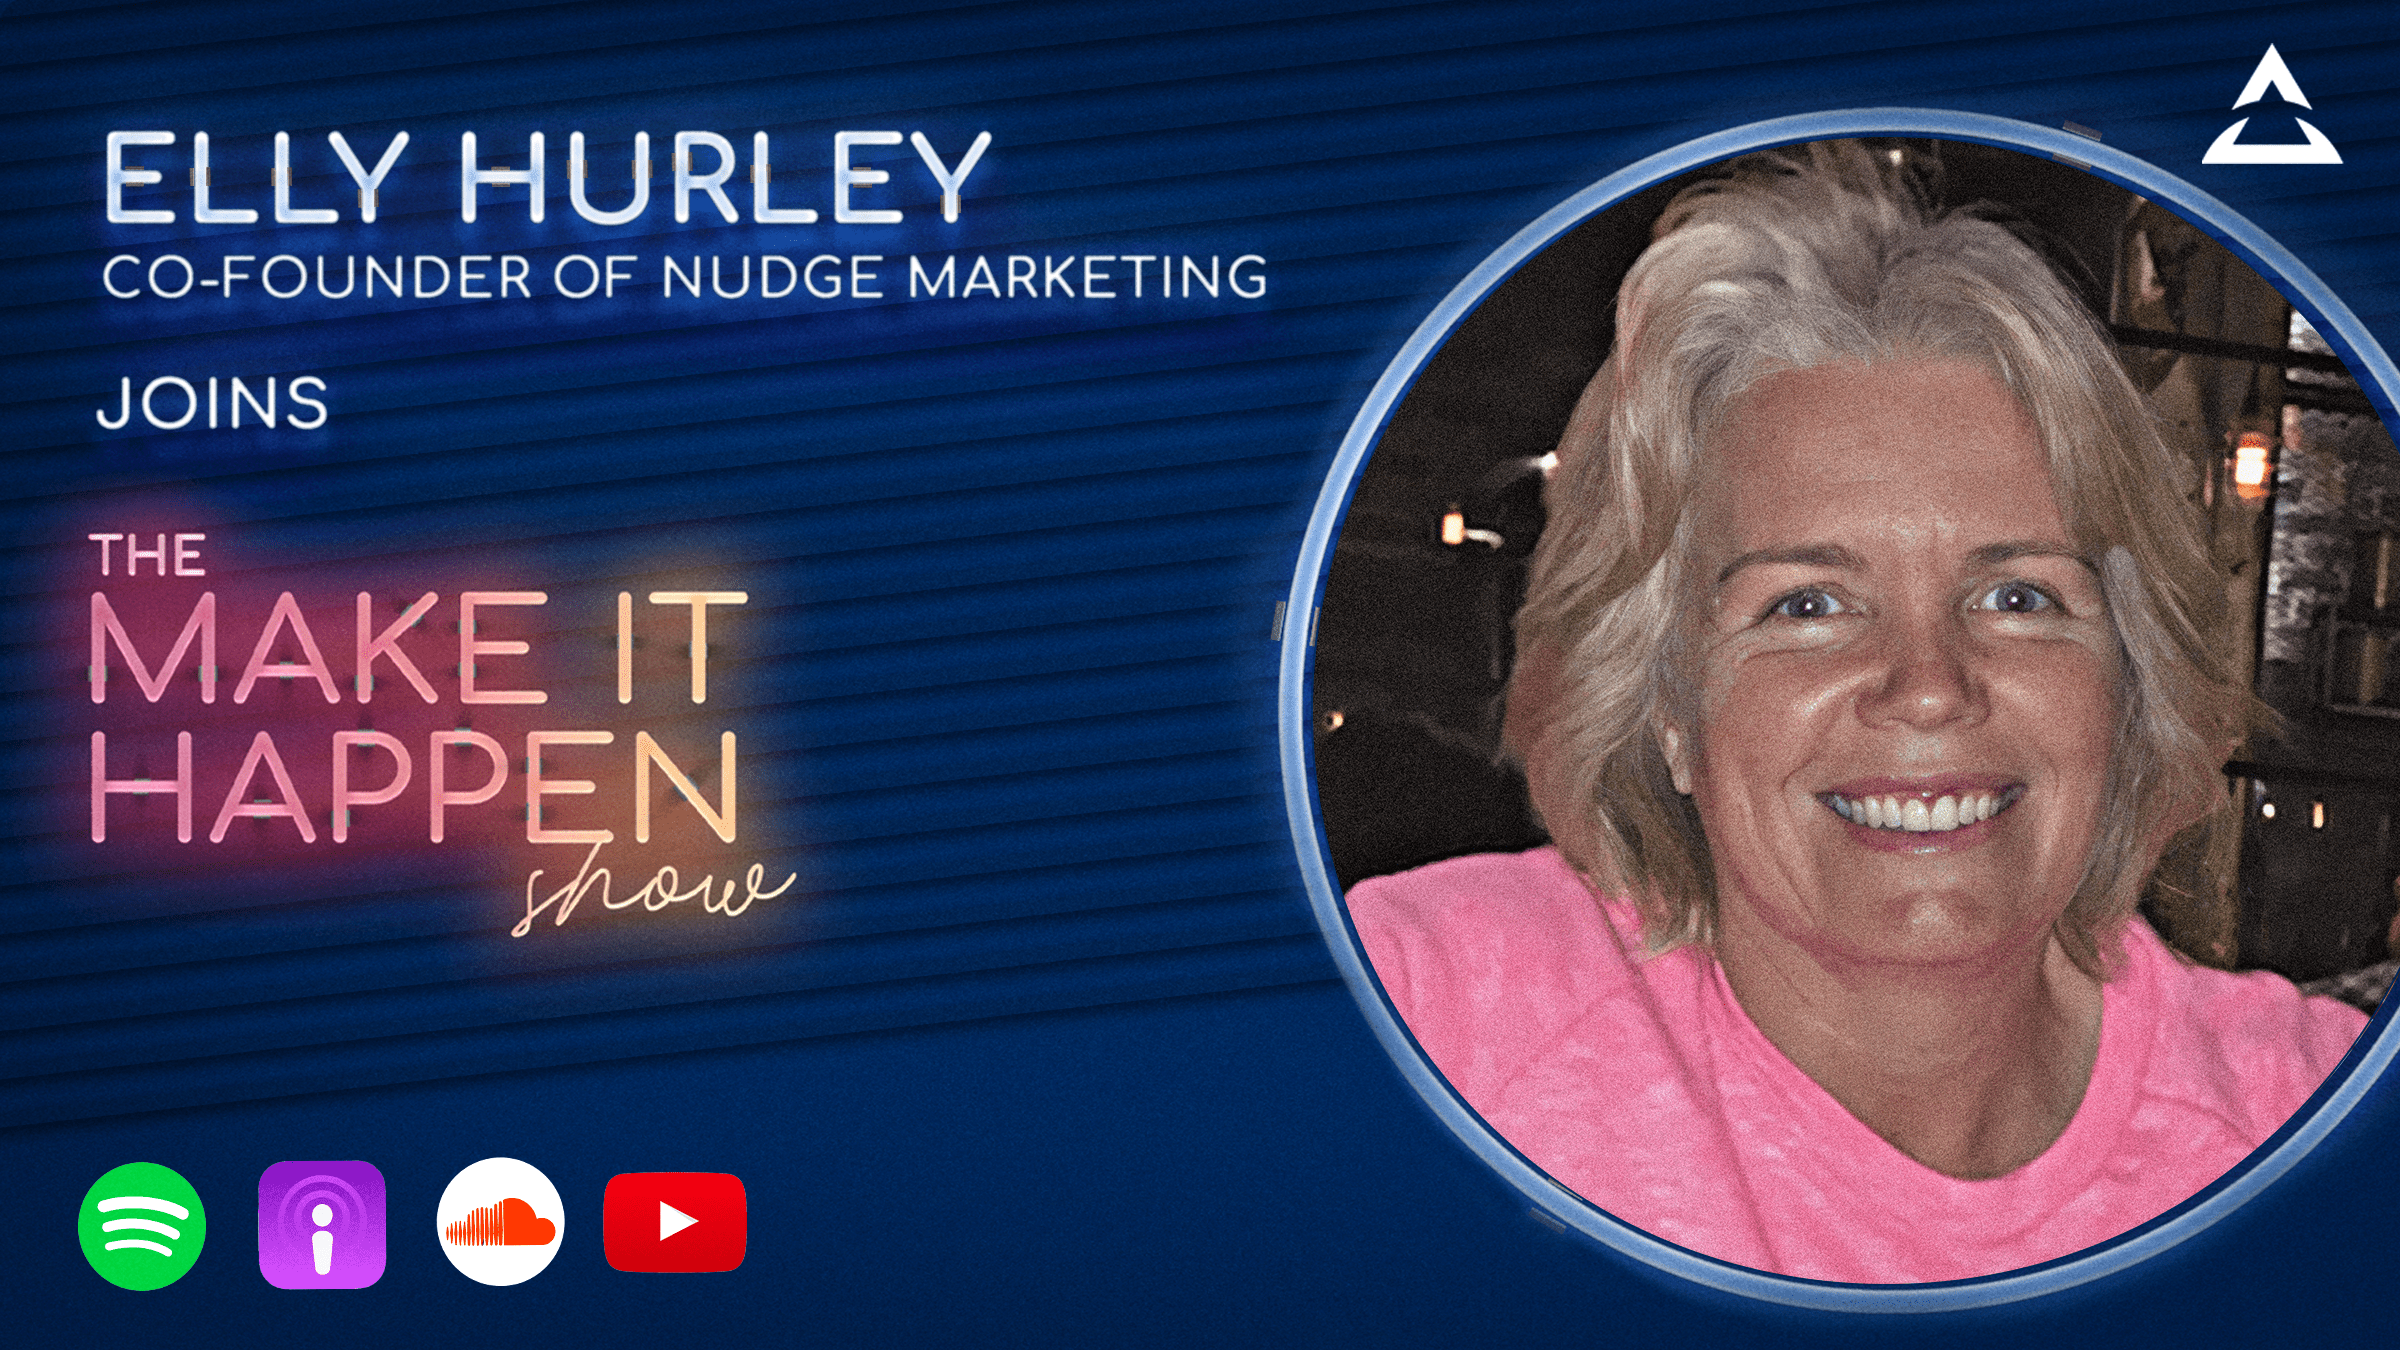 Elly Hurley, Co-Founder of Nudge Marketing on The Make It Happen Show